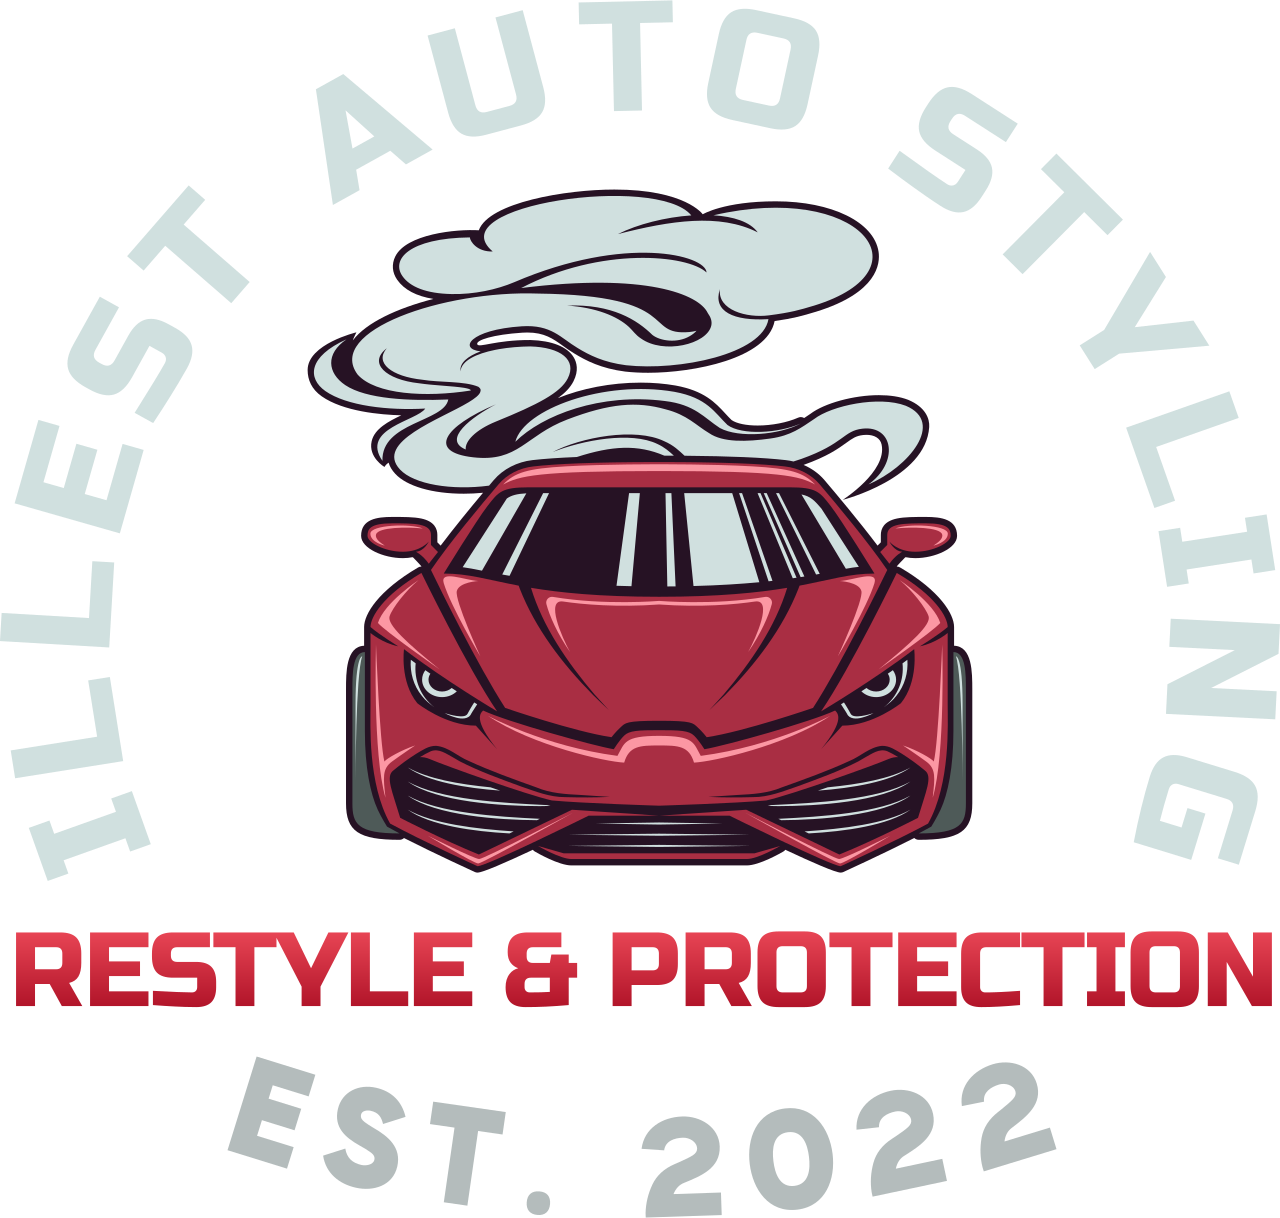 ILLEST AUTO STYLING's web page